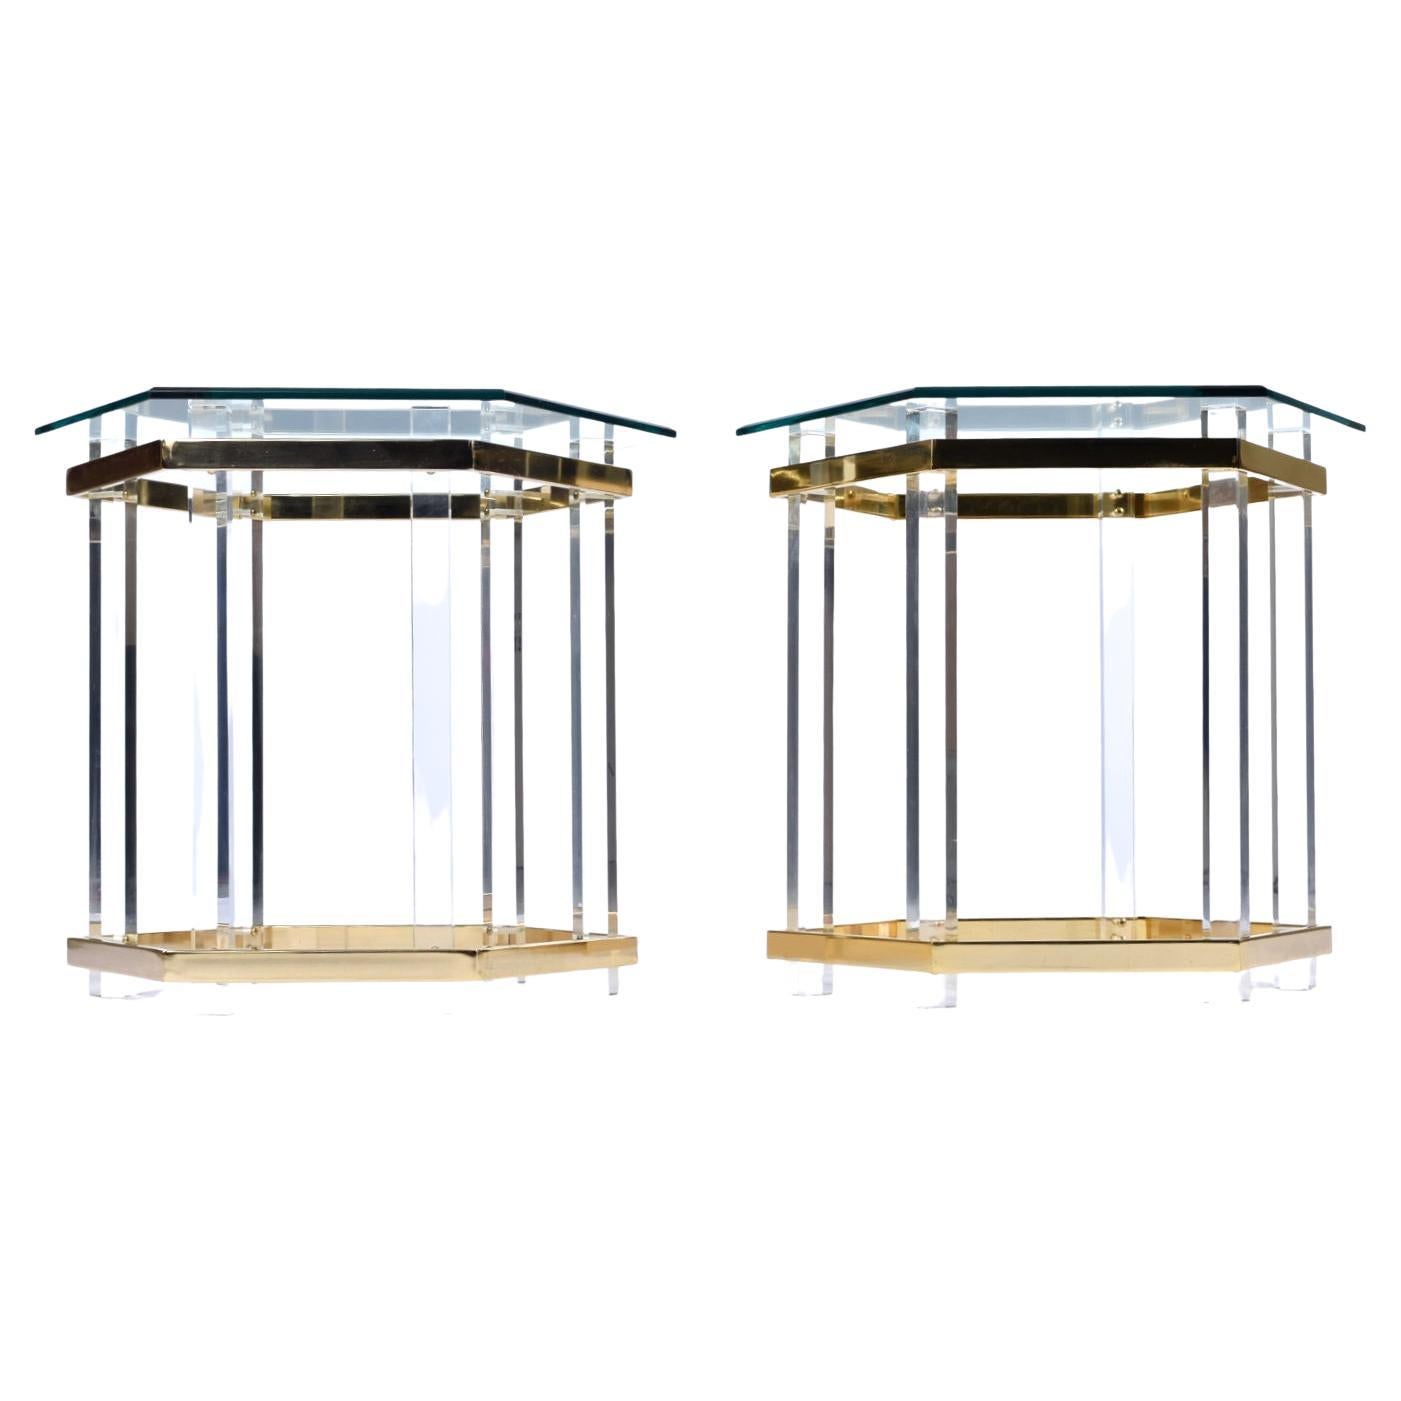 Vintage 1980s Charles Hollis Jones style Lucite and brass end tables with beveled hexagon glass top. The geometric beveled glass top creates a silhouette mimicking the dynamic angles and form of the table base. Vertical acrylic architectural pillars